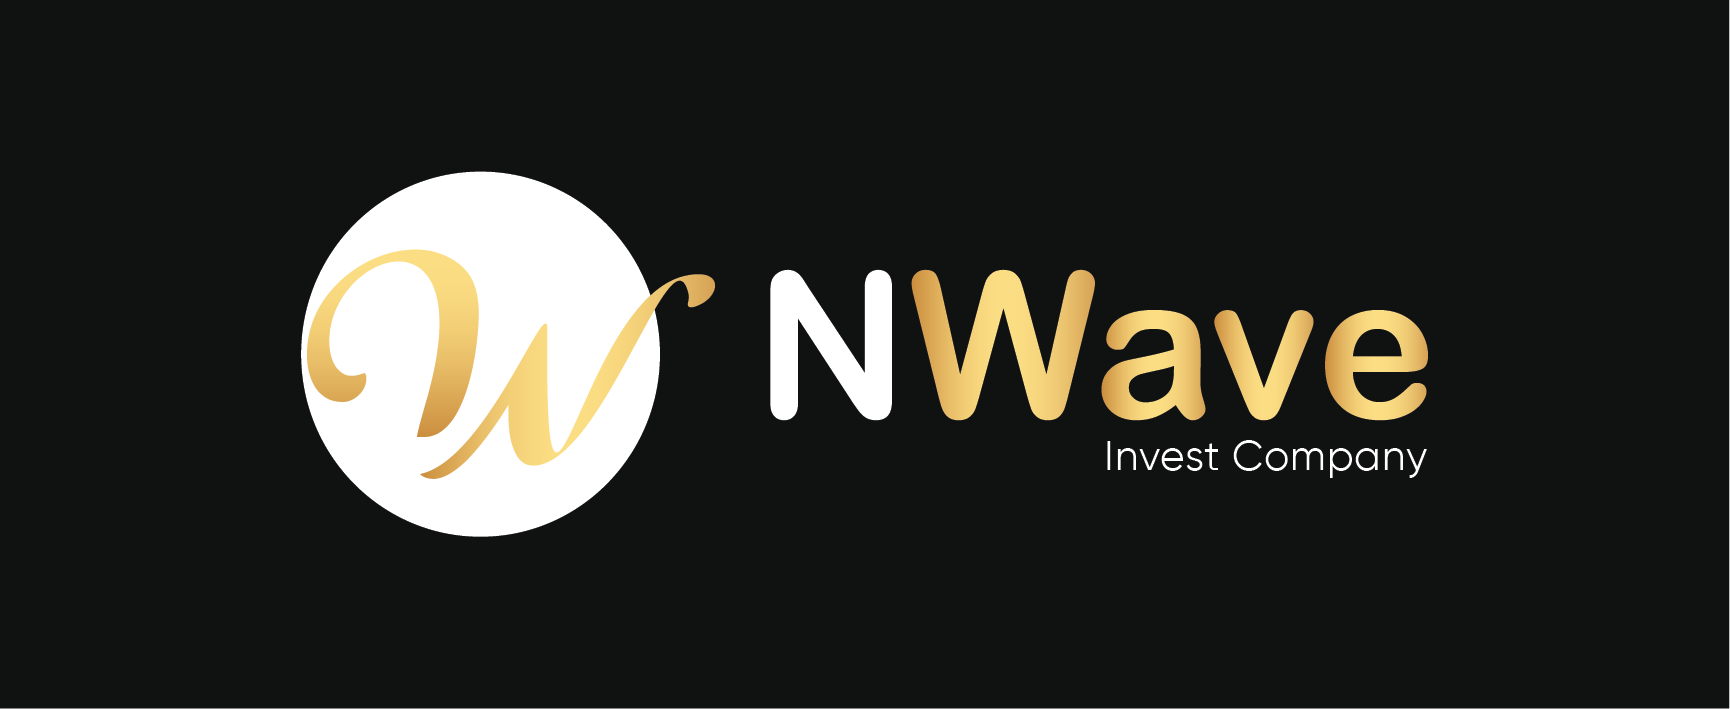 Nwave Invest